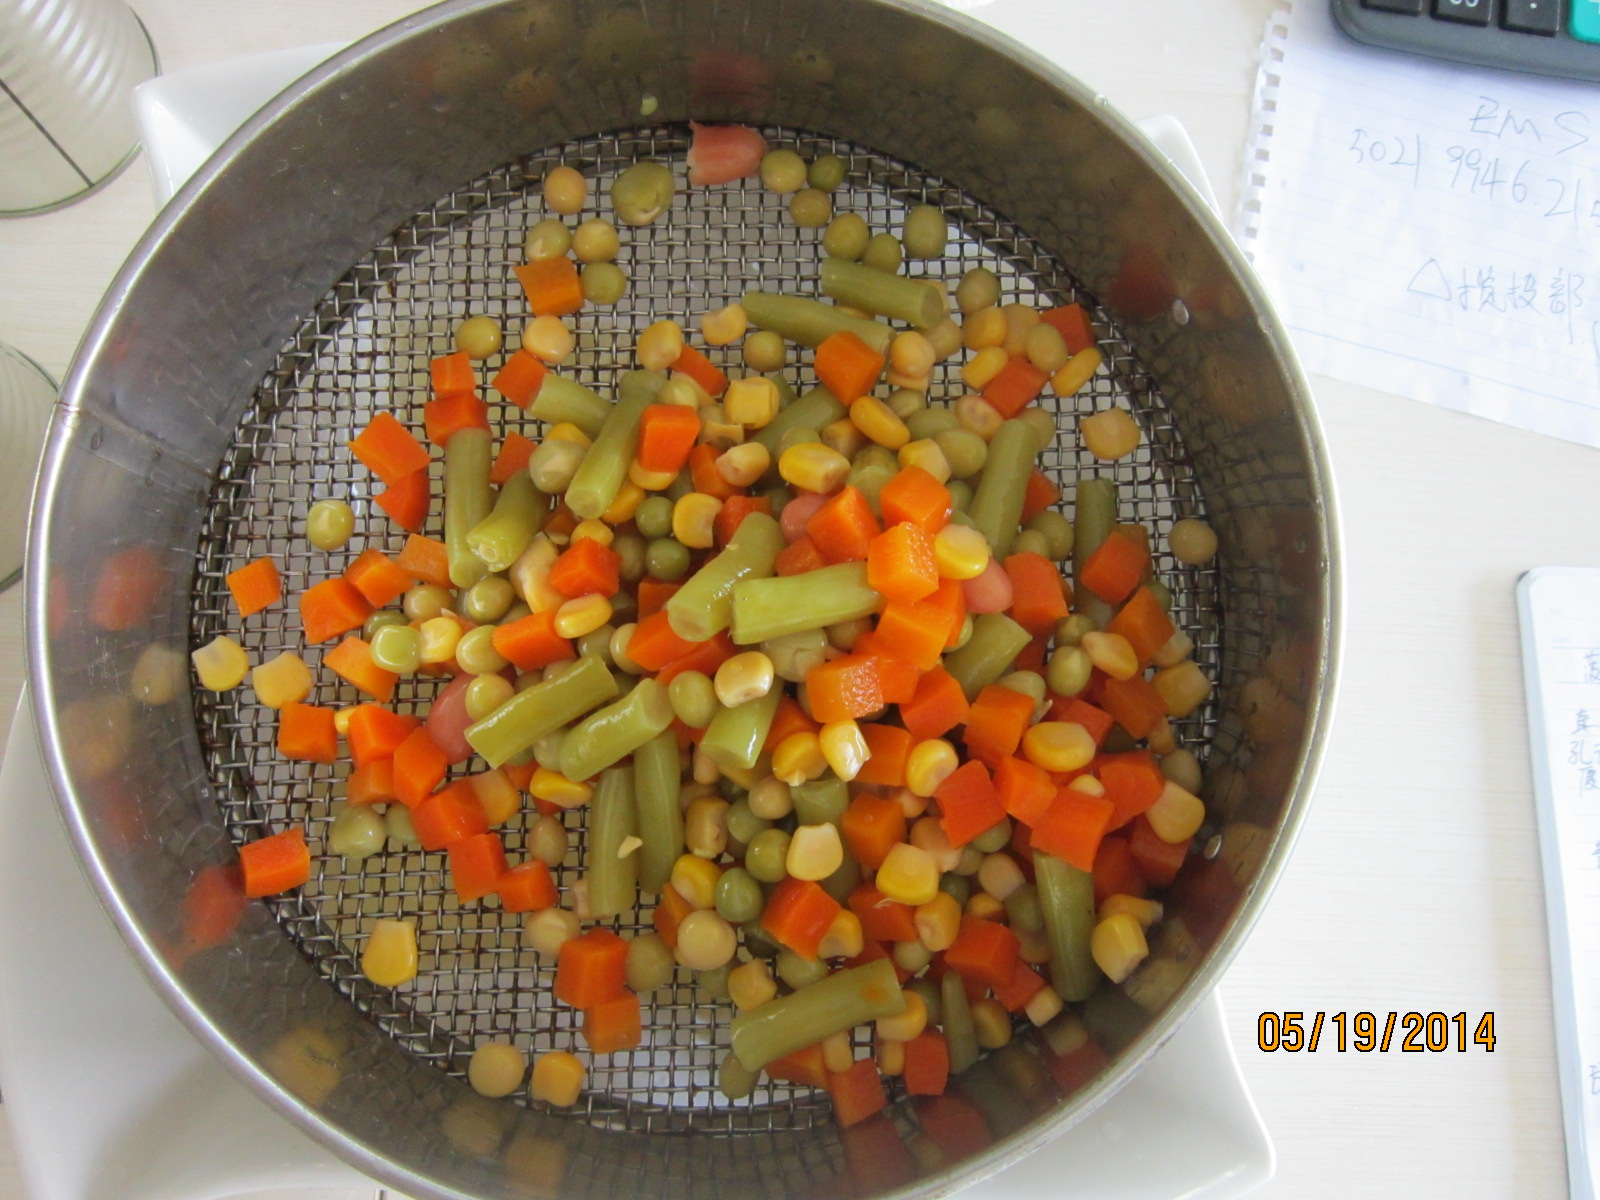 Canned mixed vegetable